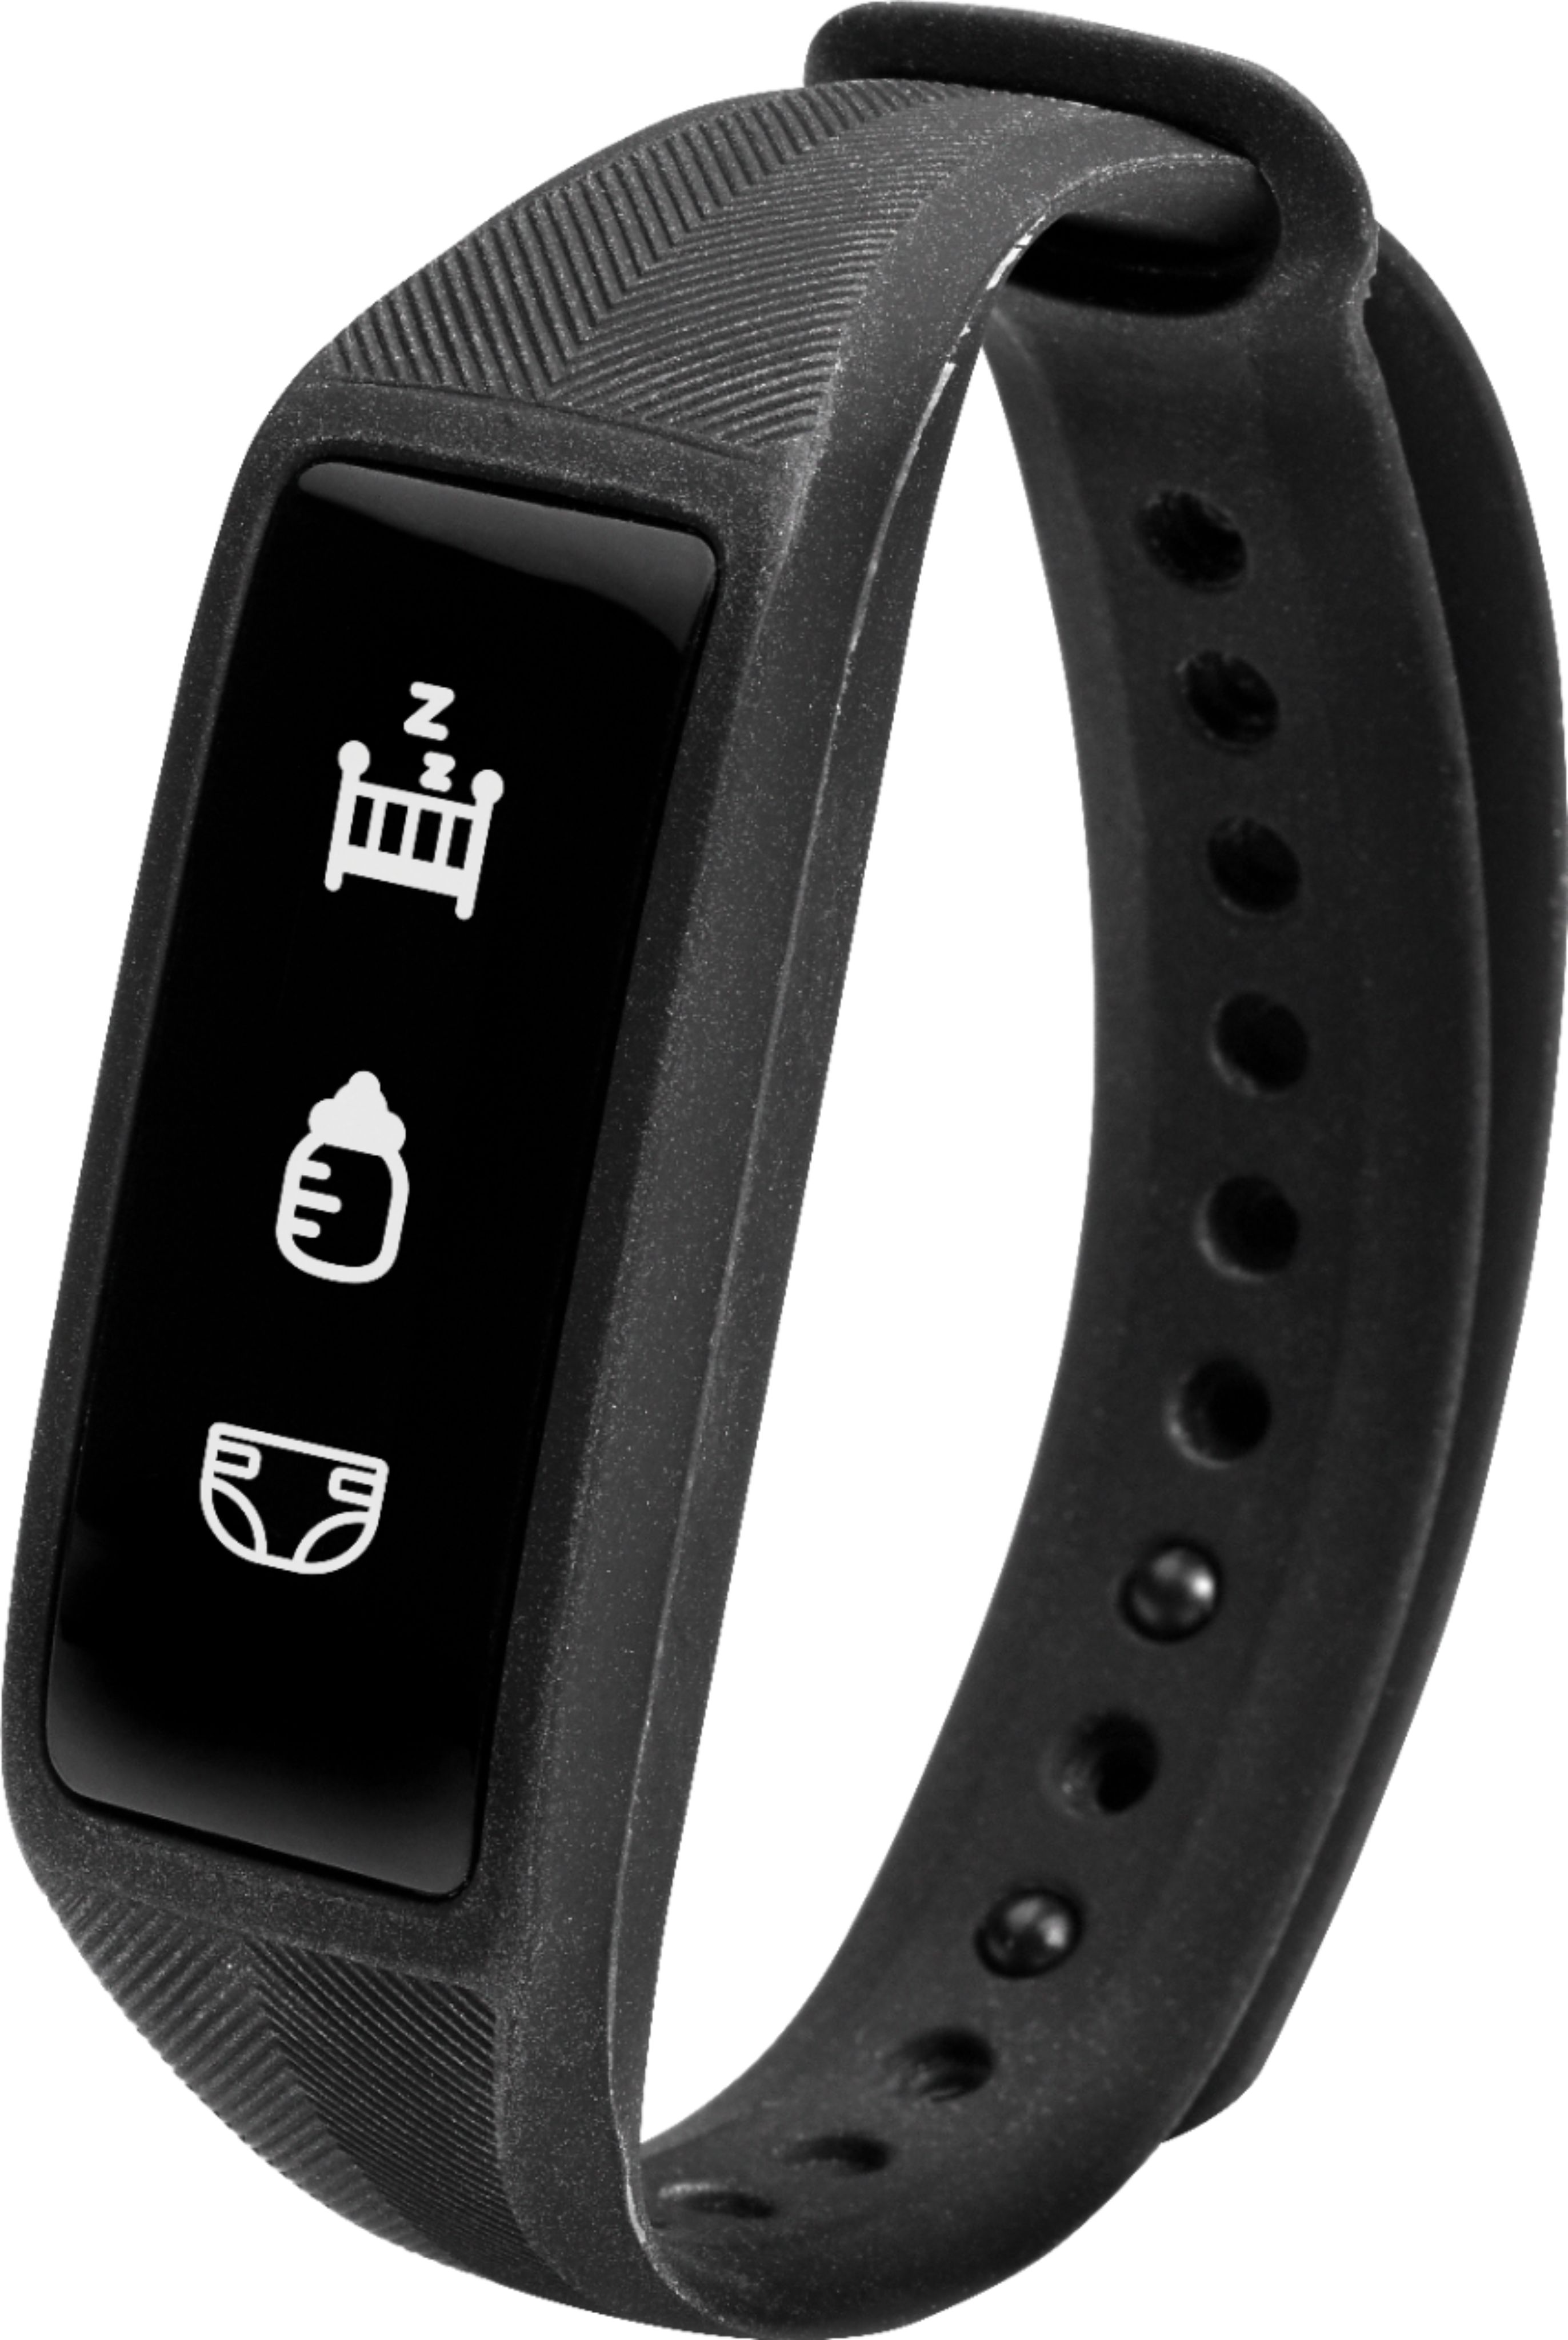 Project Nursery Baby Parent & Baby Monitor SmartBand 